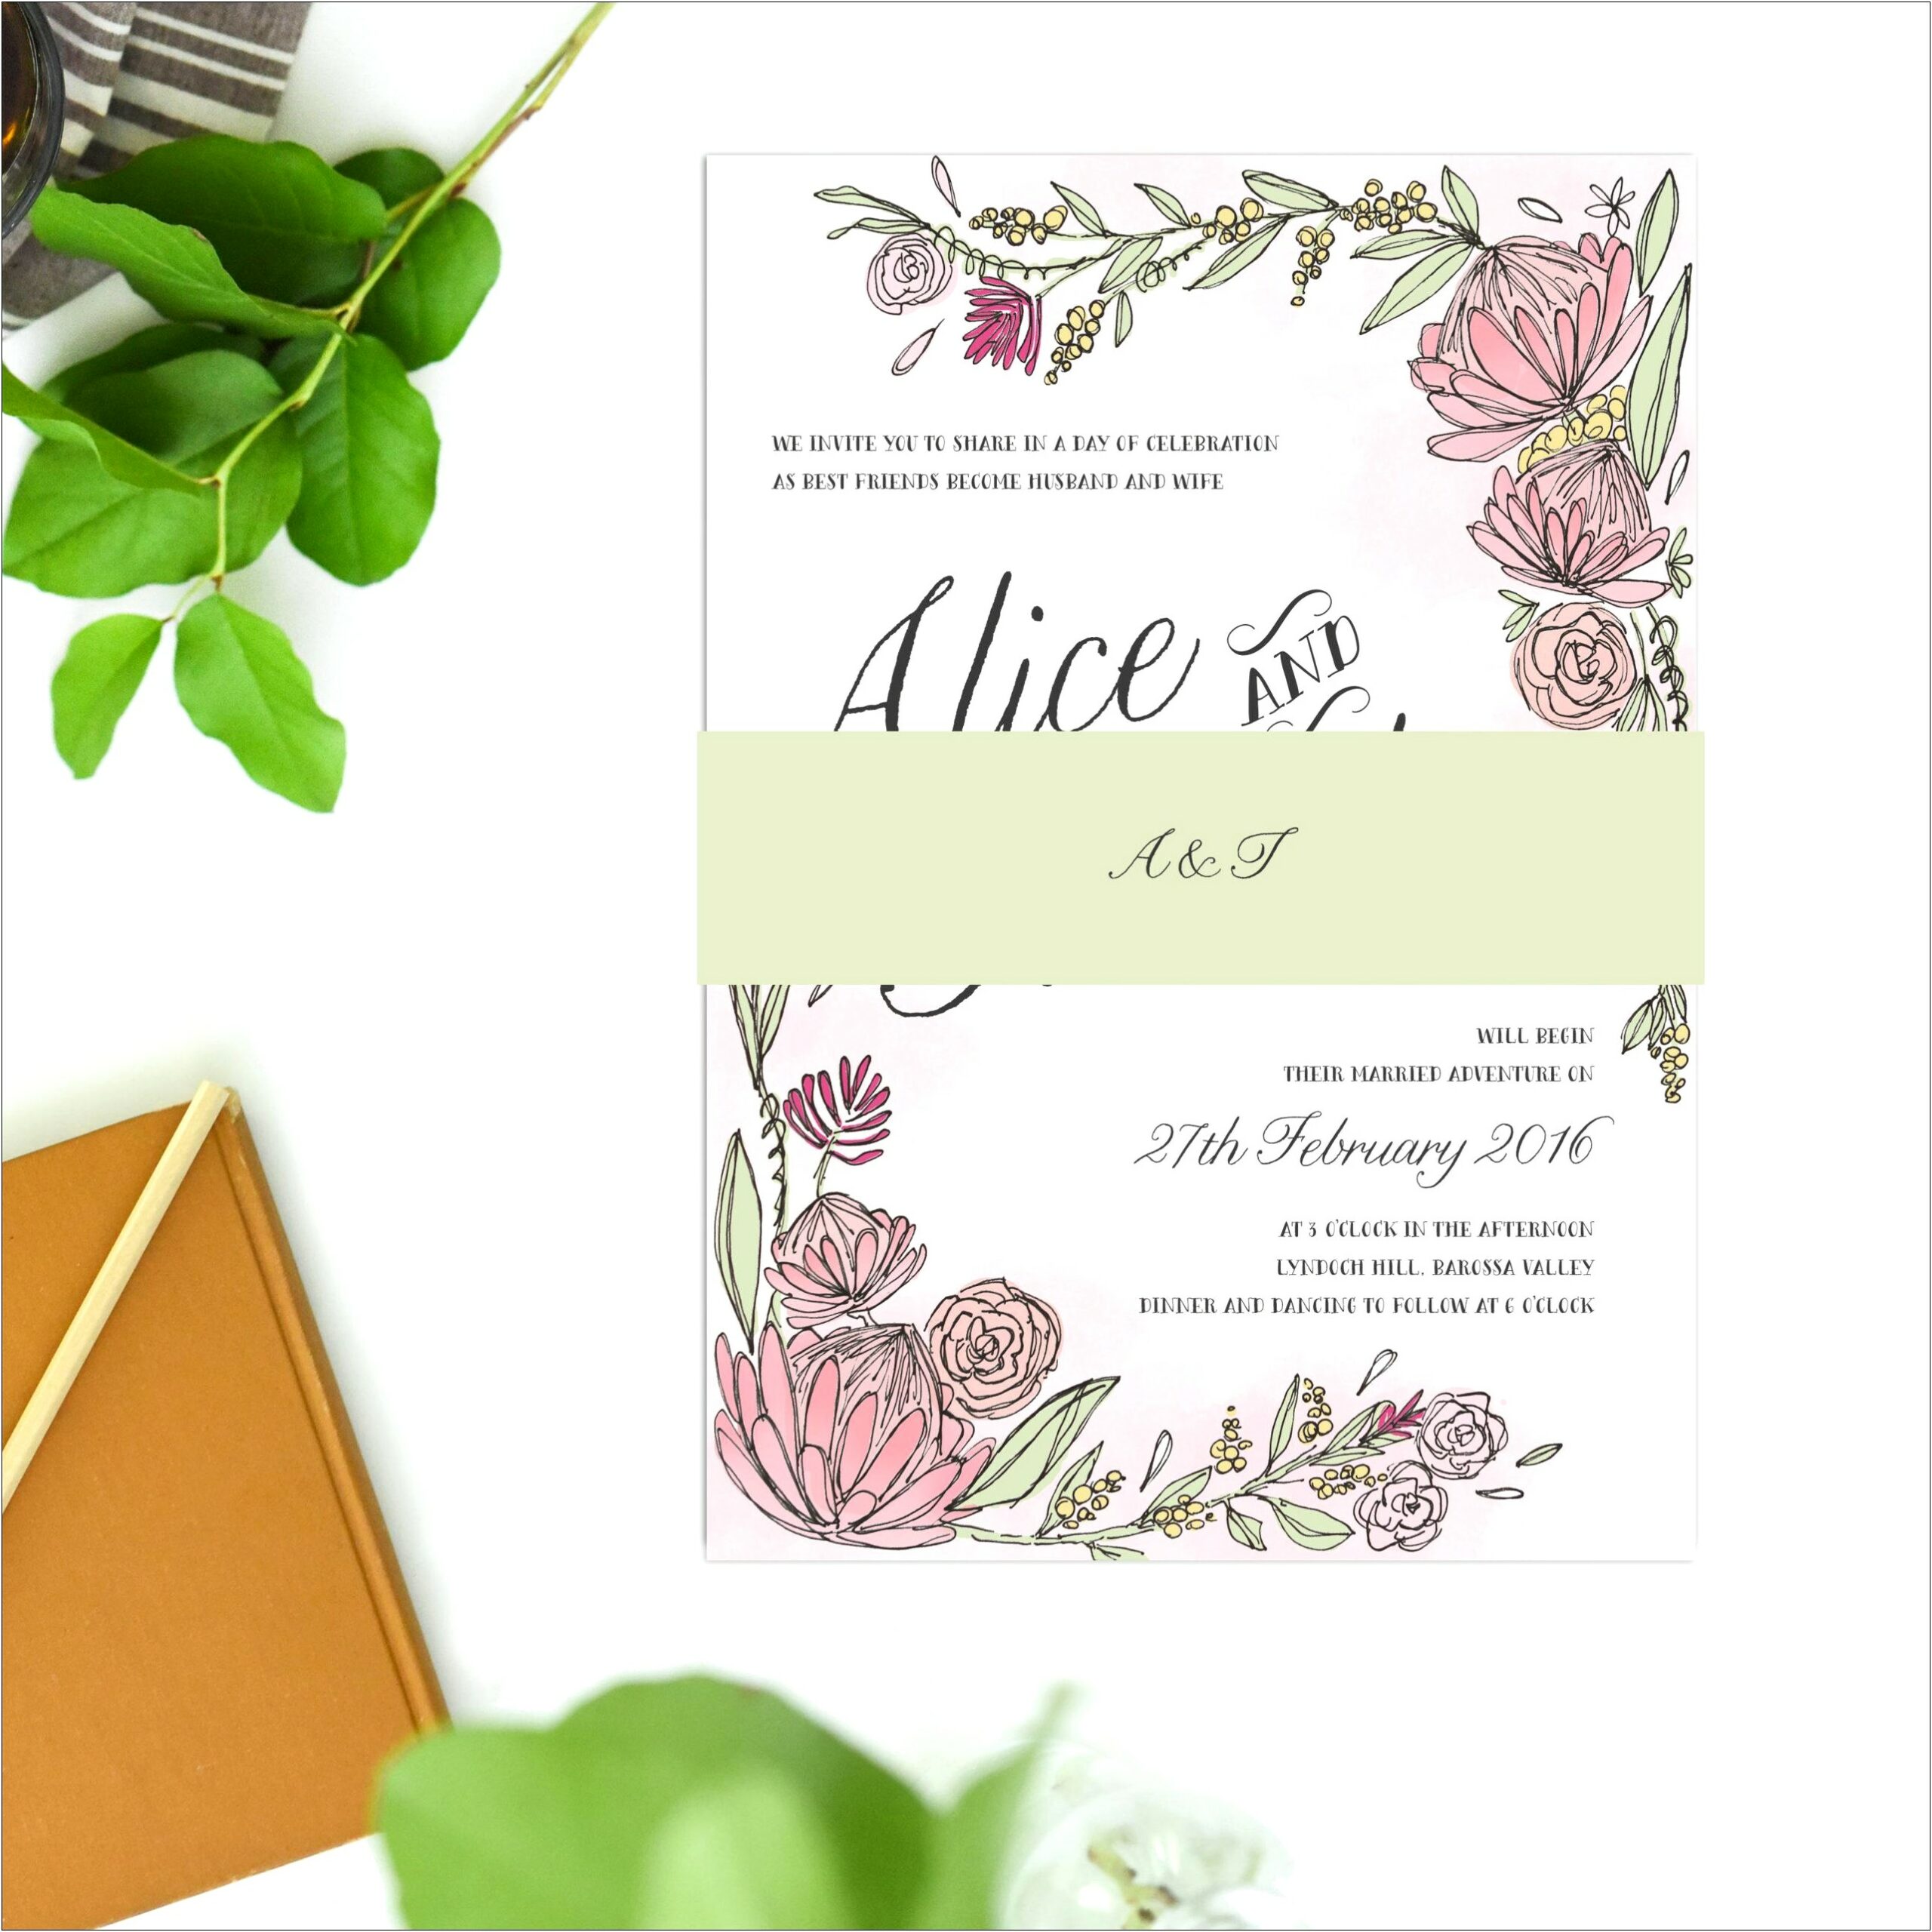 Best Friends Become Husband And Wife Wedding Invitation